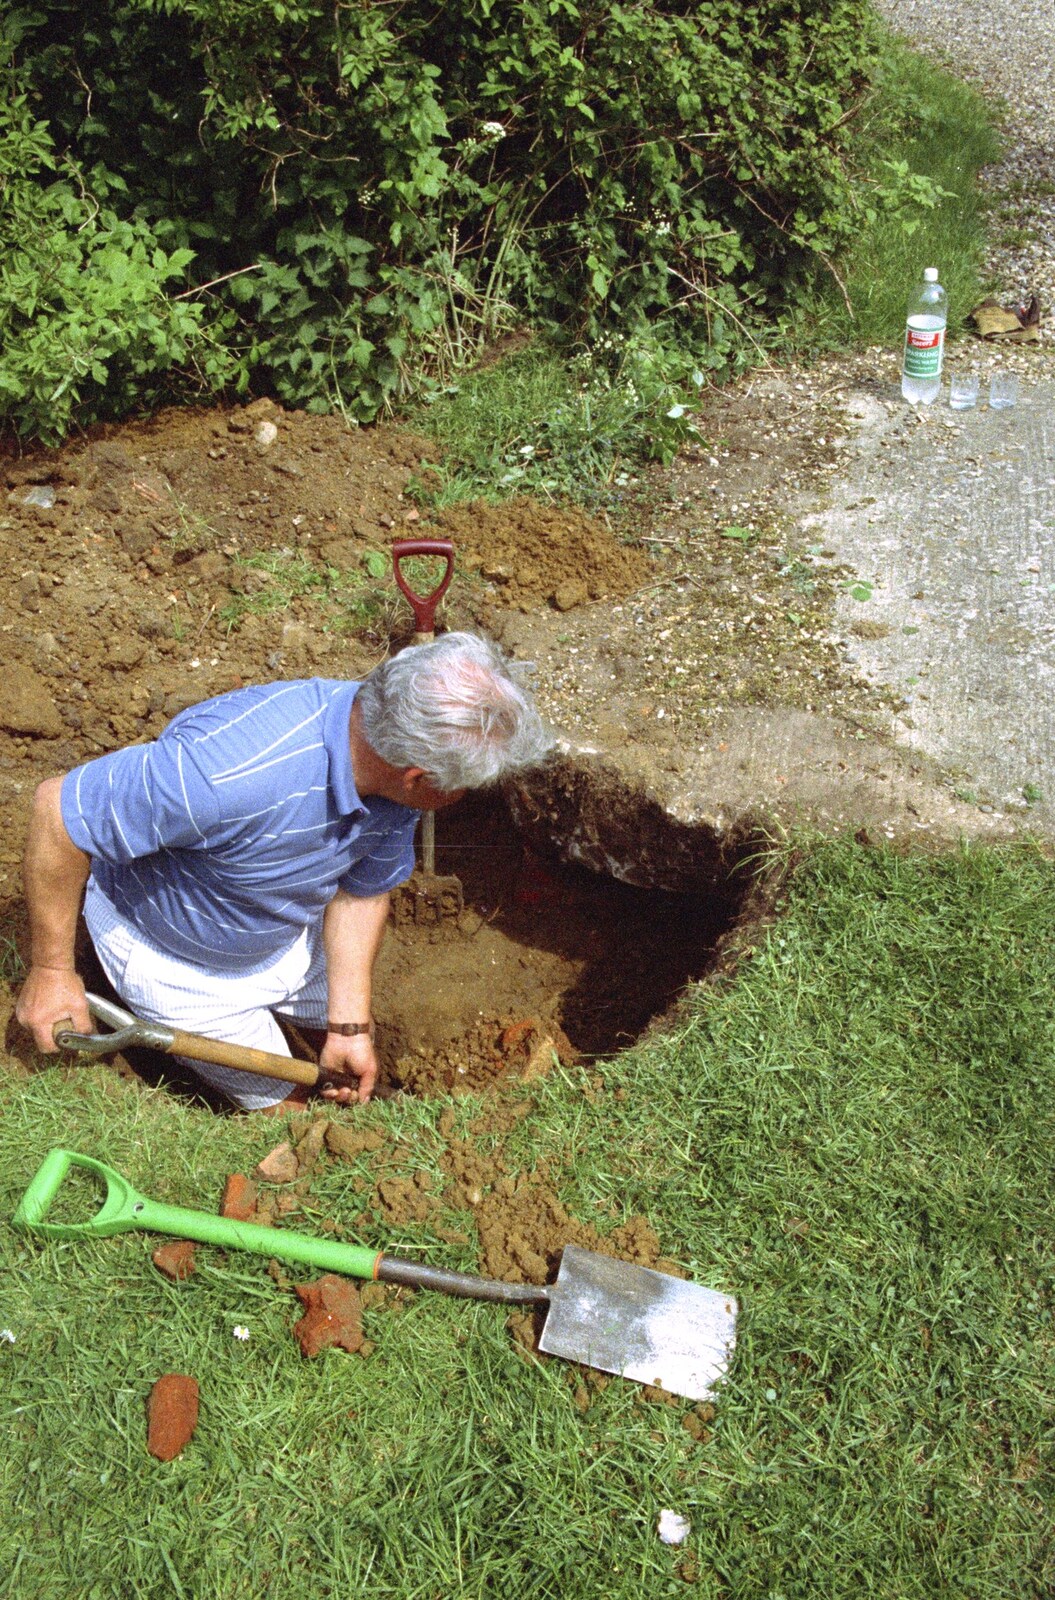 Lou digs an exploratory hole by the side of the well from Hale-Bopp and Bedroom Demolition, Brome, Suffolk - 10th May 1997